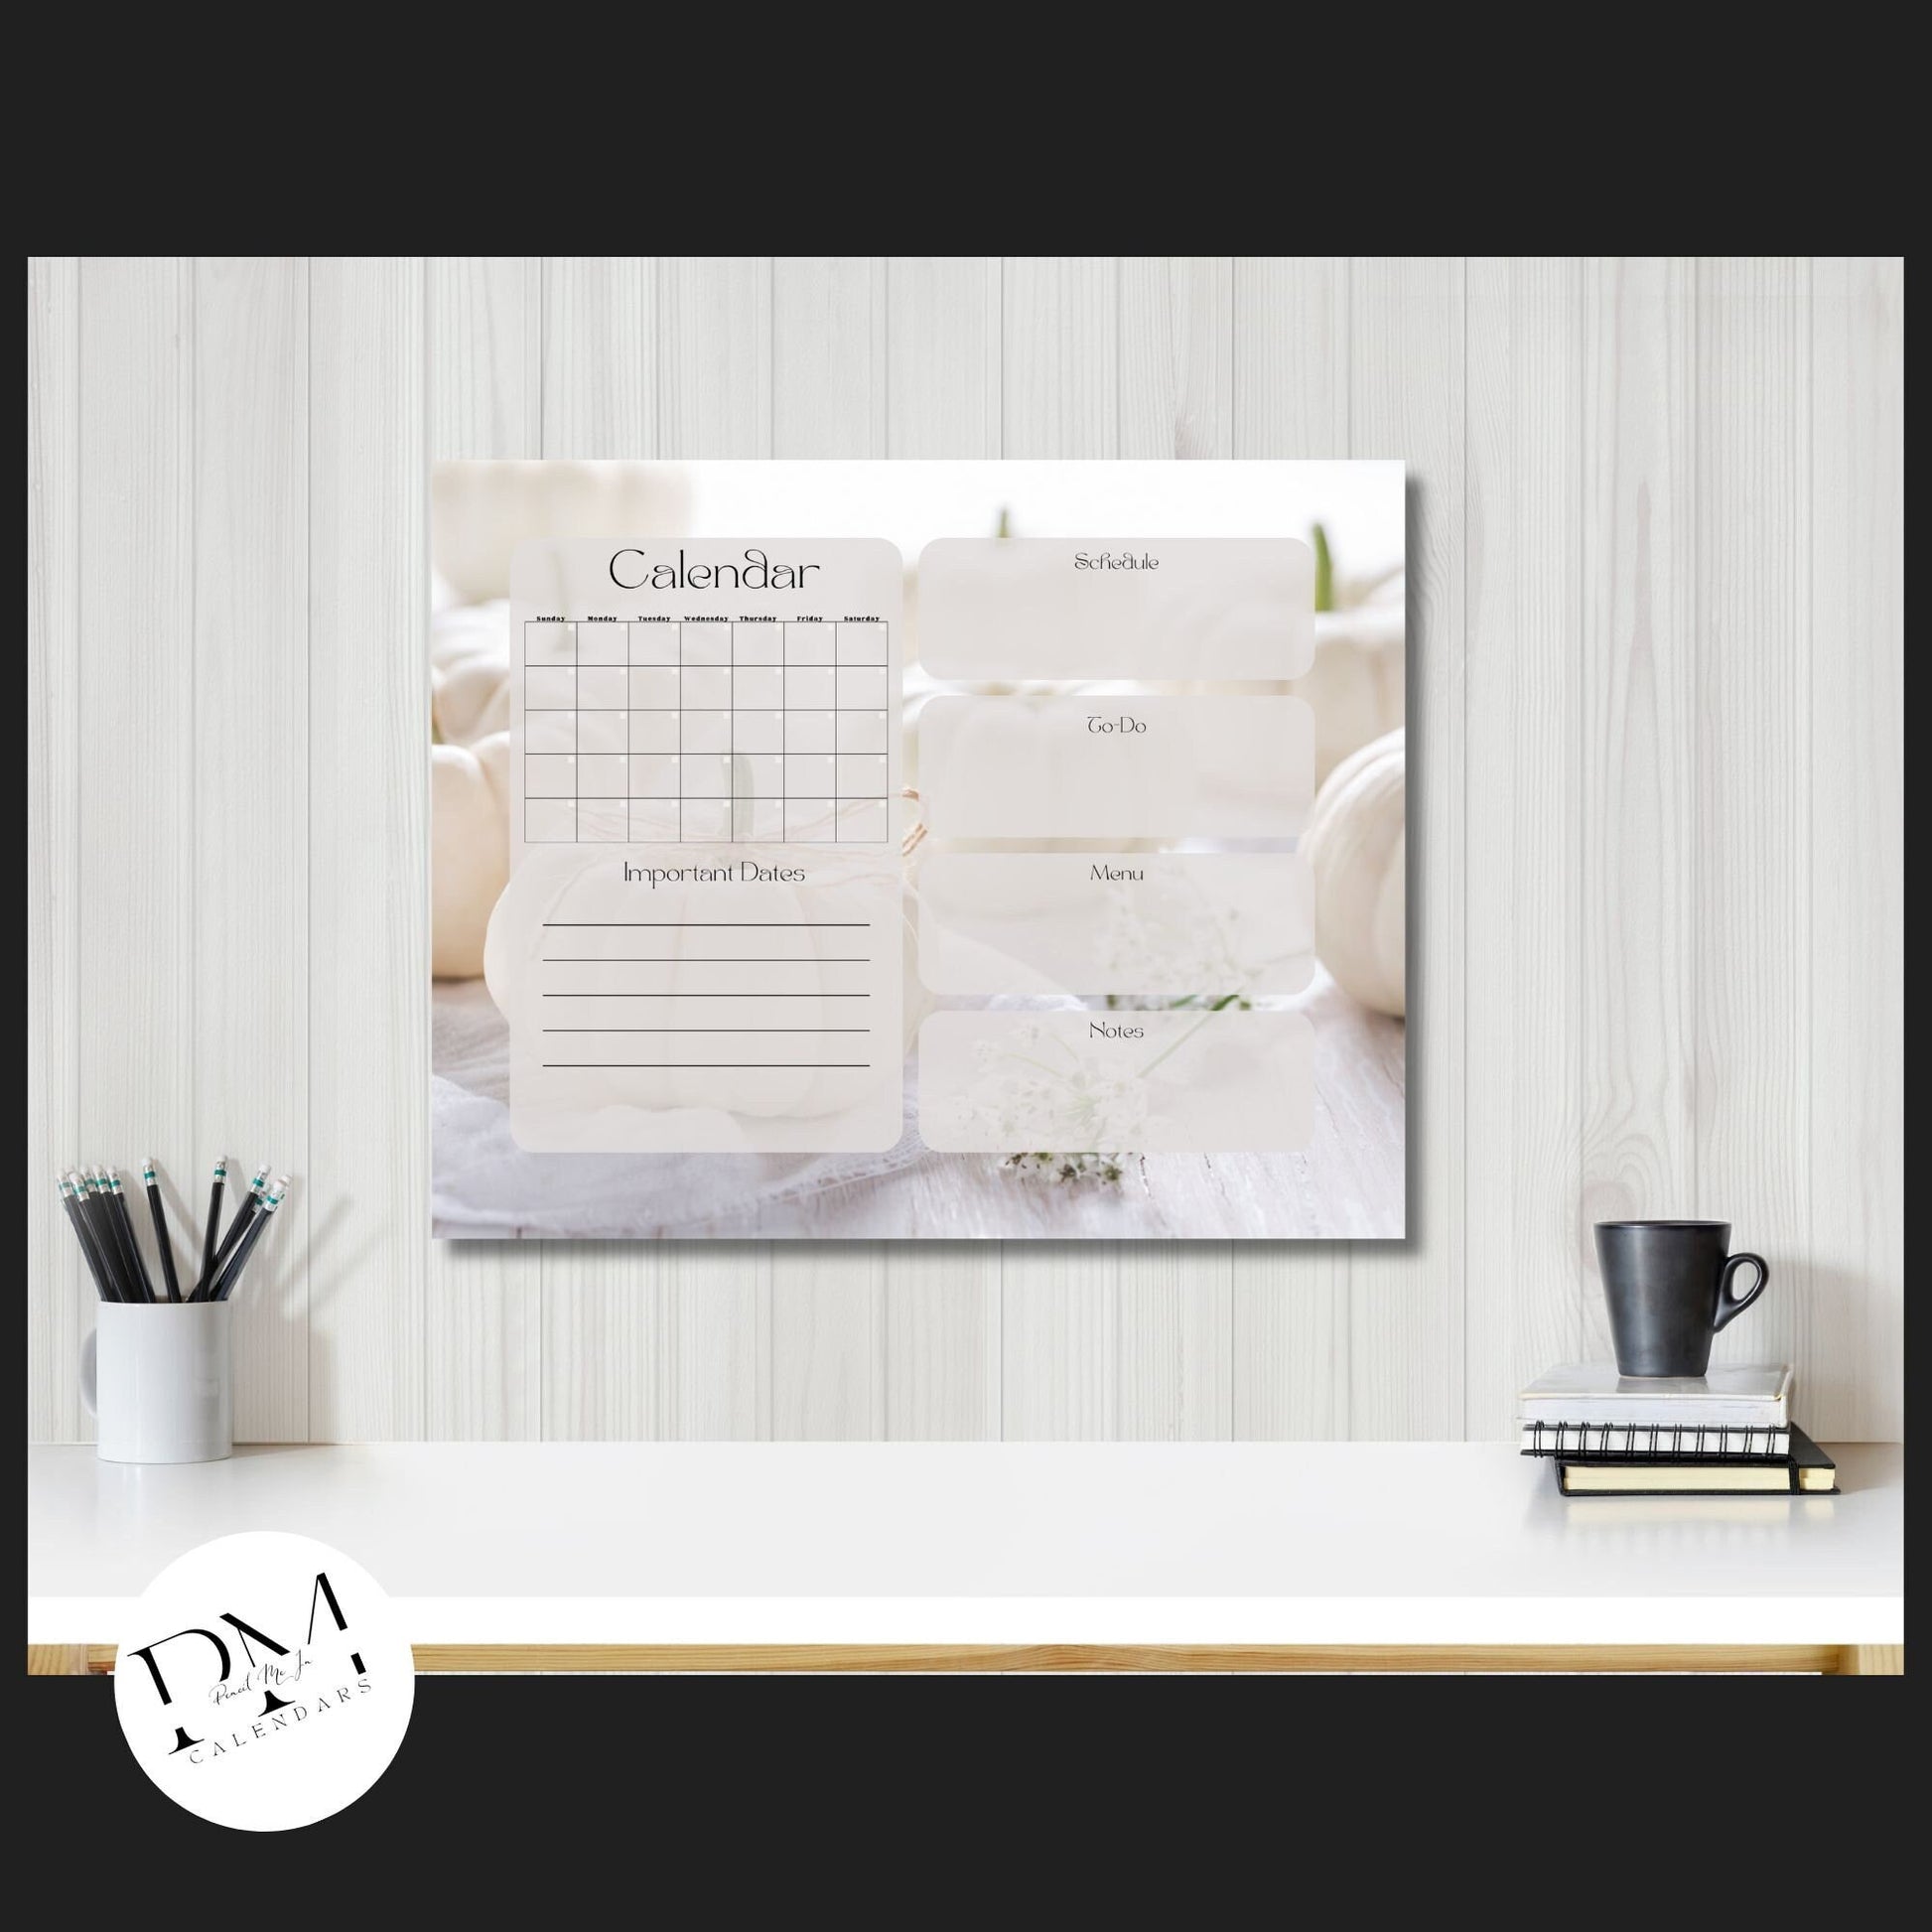 Acrylic Wall Calendar. White pumpkins and babies breath floral in background with a Blank Calendar and important dates section to the right and 4 separate sections to left for Schedule, To-Do, Menueand Notes